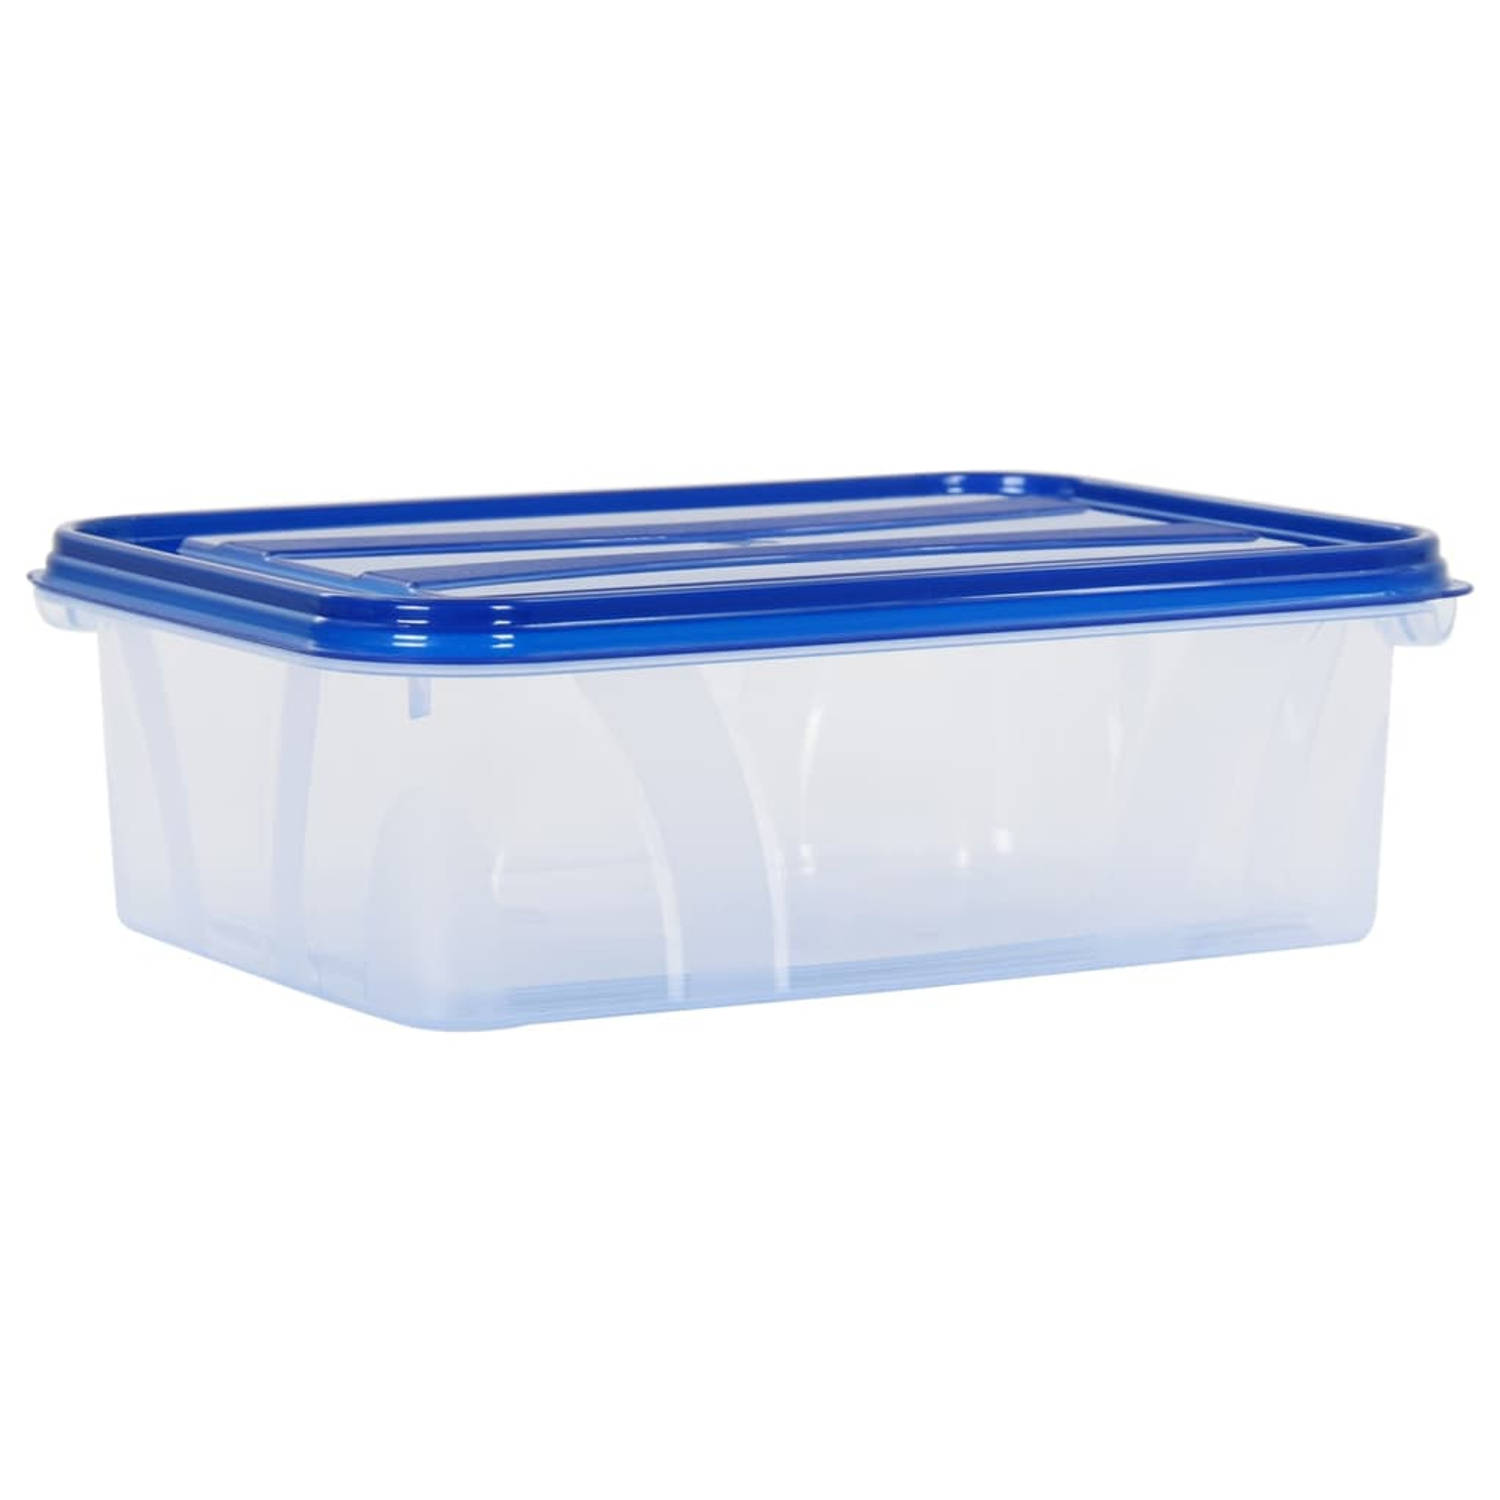 The Living Store Voedselopbergcontainer - 0.7L - transparant/blauw